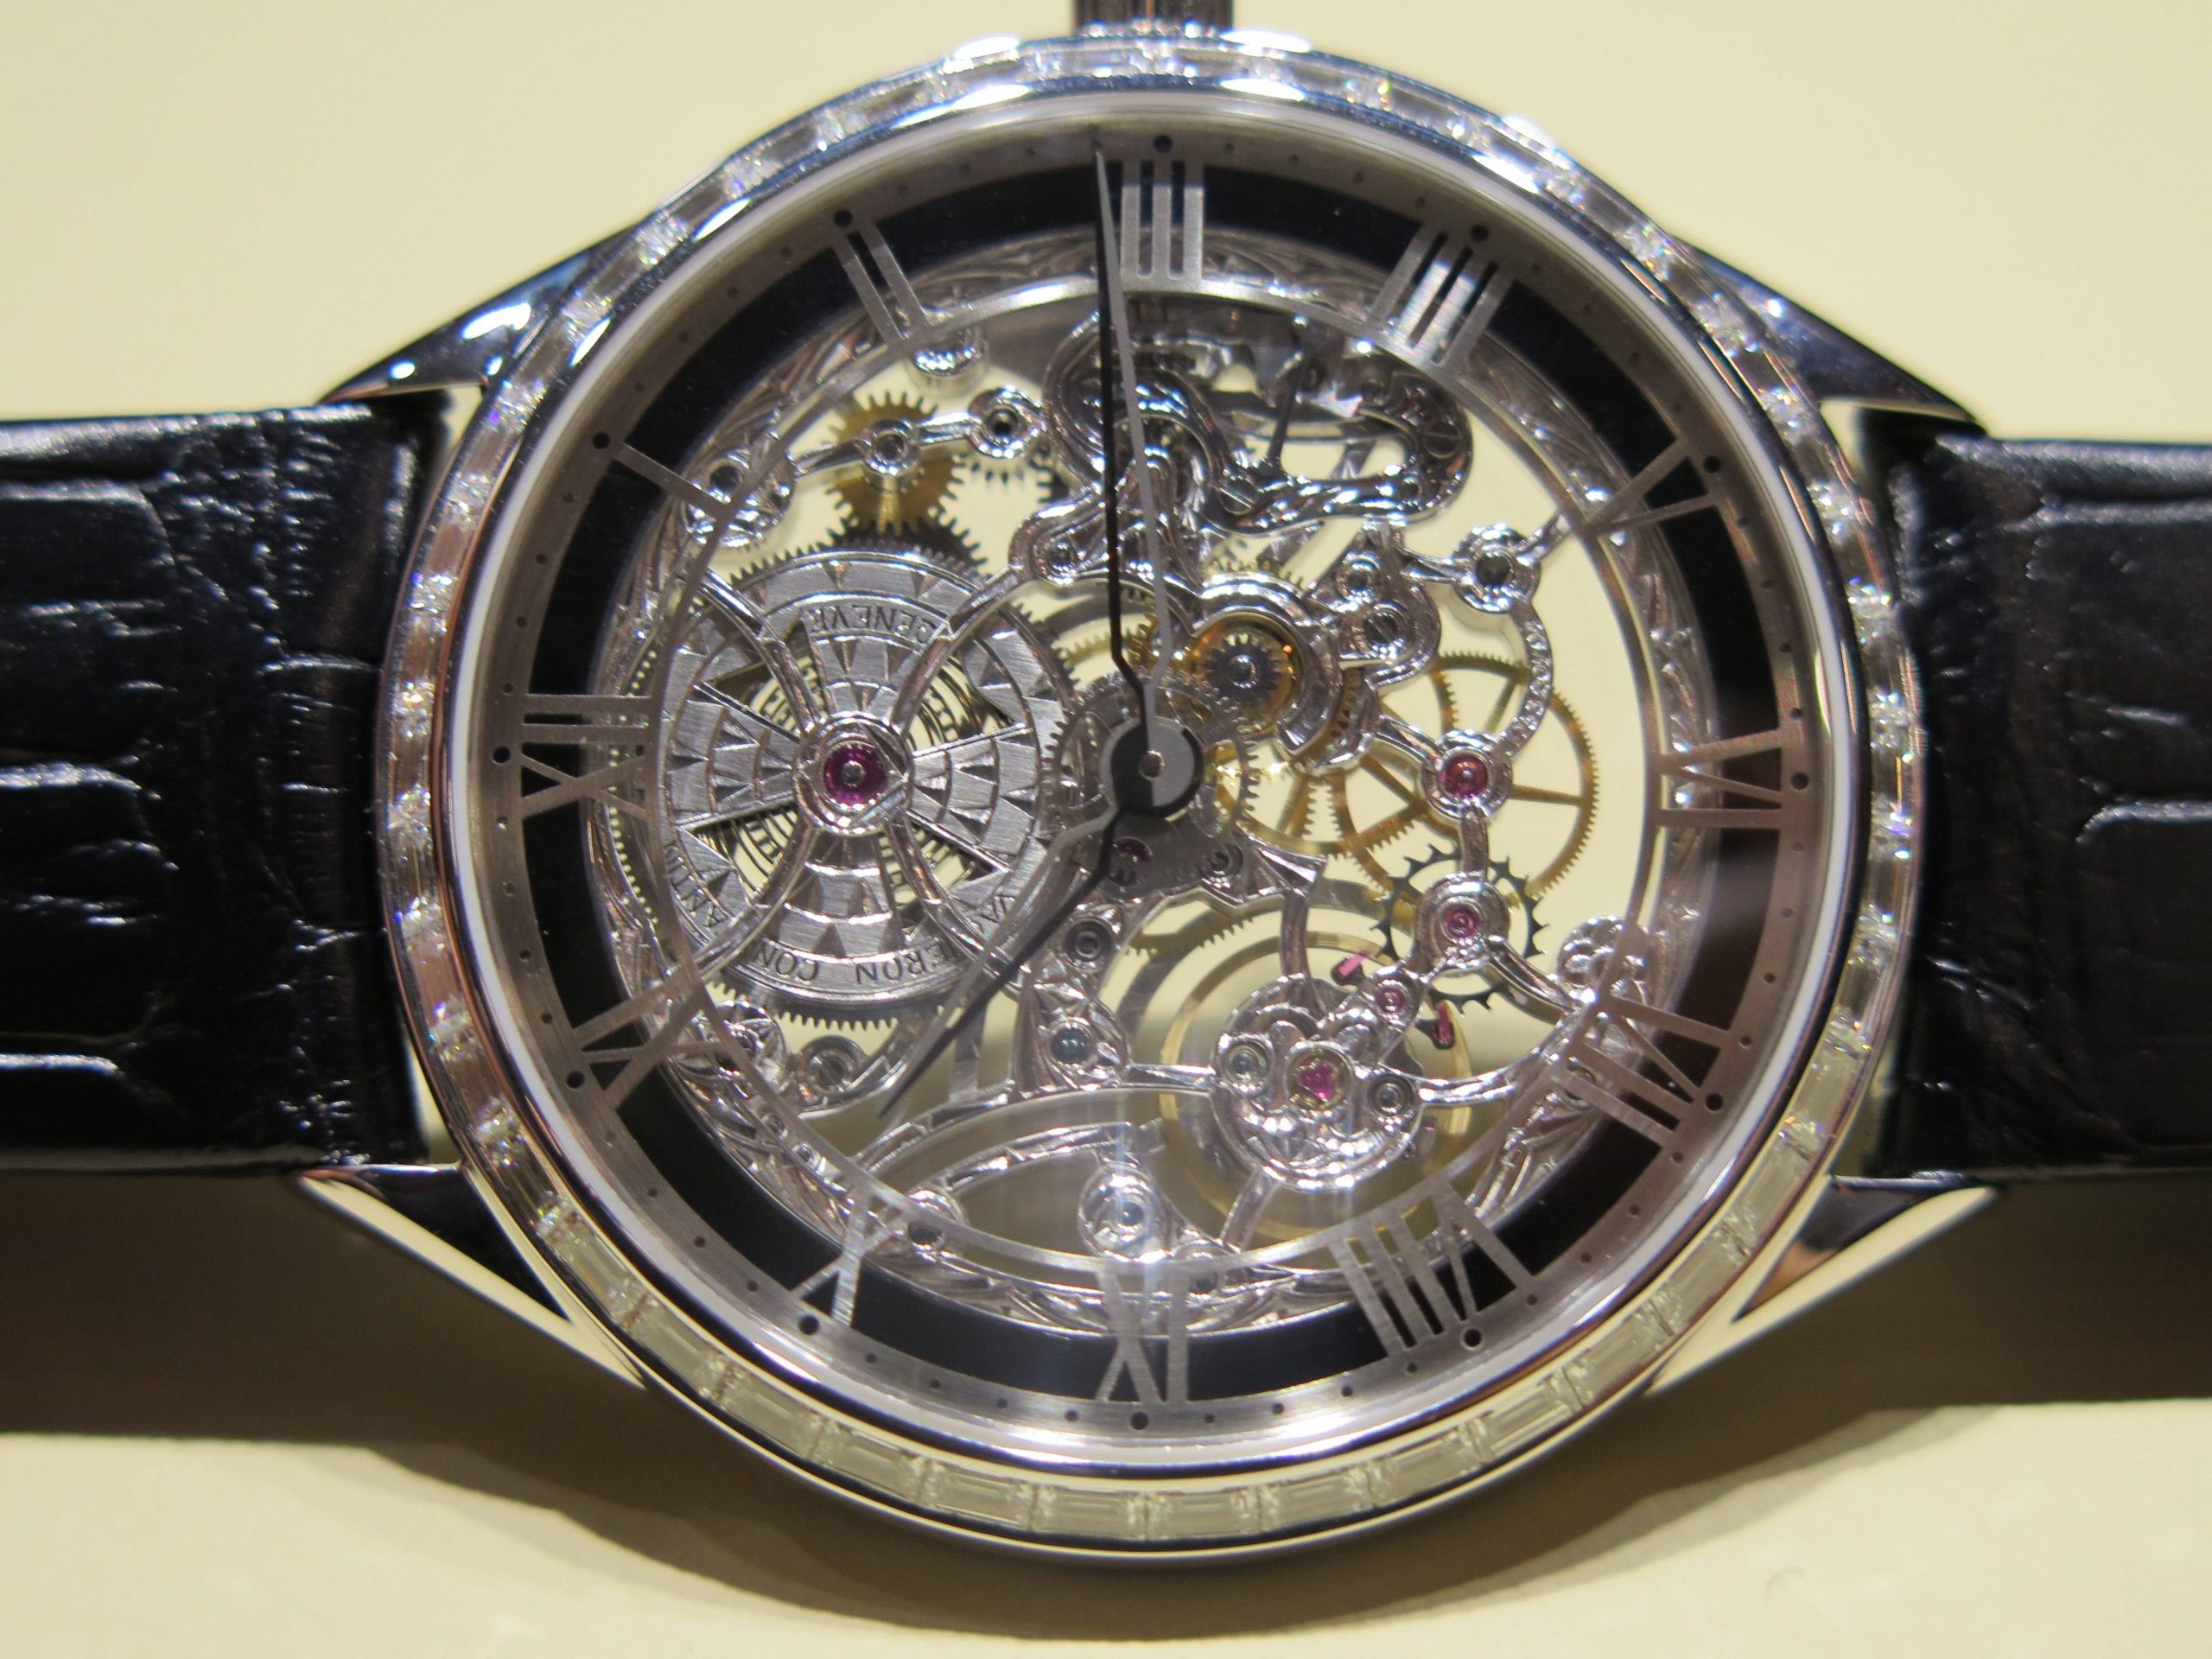 Best Skeletonized Watches of SIHH 2014